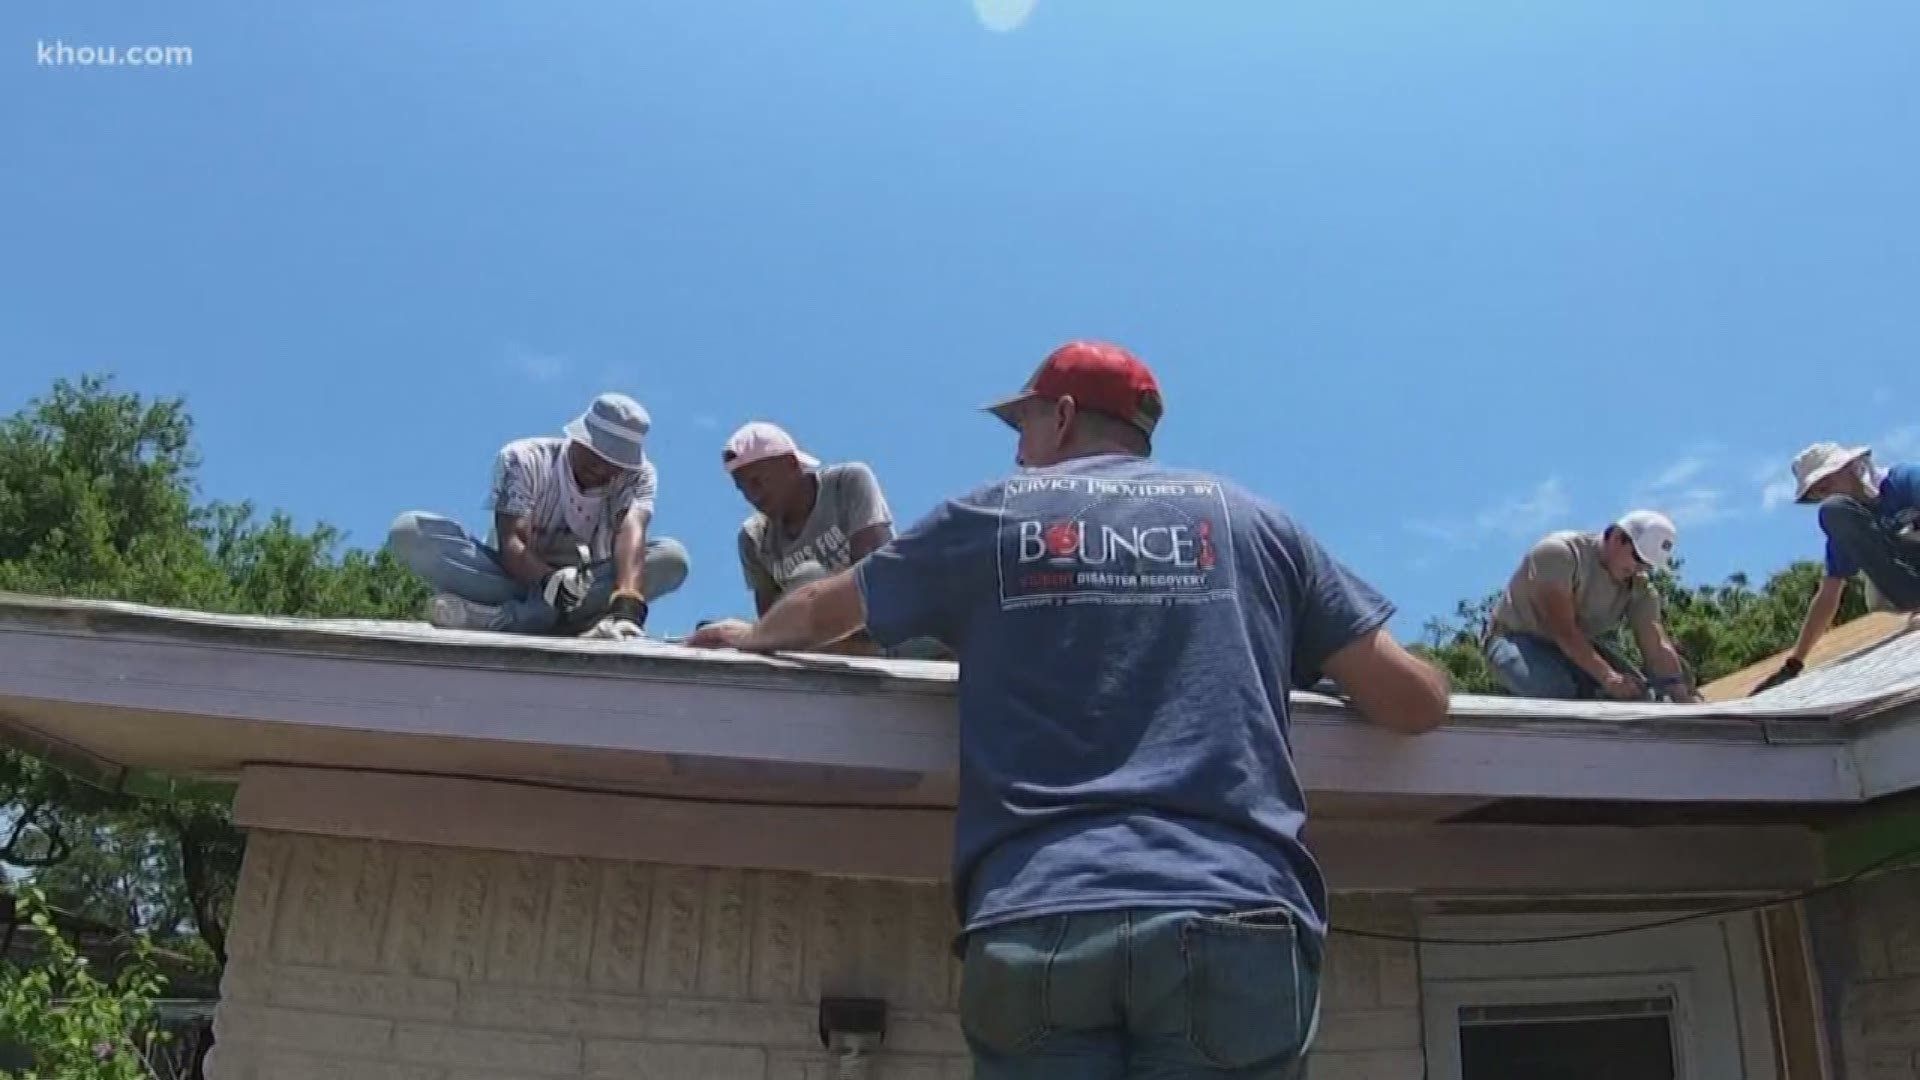 More than a hundred students are spending their summer break to make a difference. They're helping fix up homes damaged nearly two years ago during Hurricane Harvey.